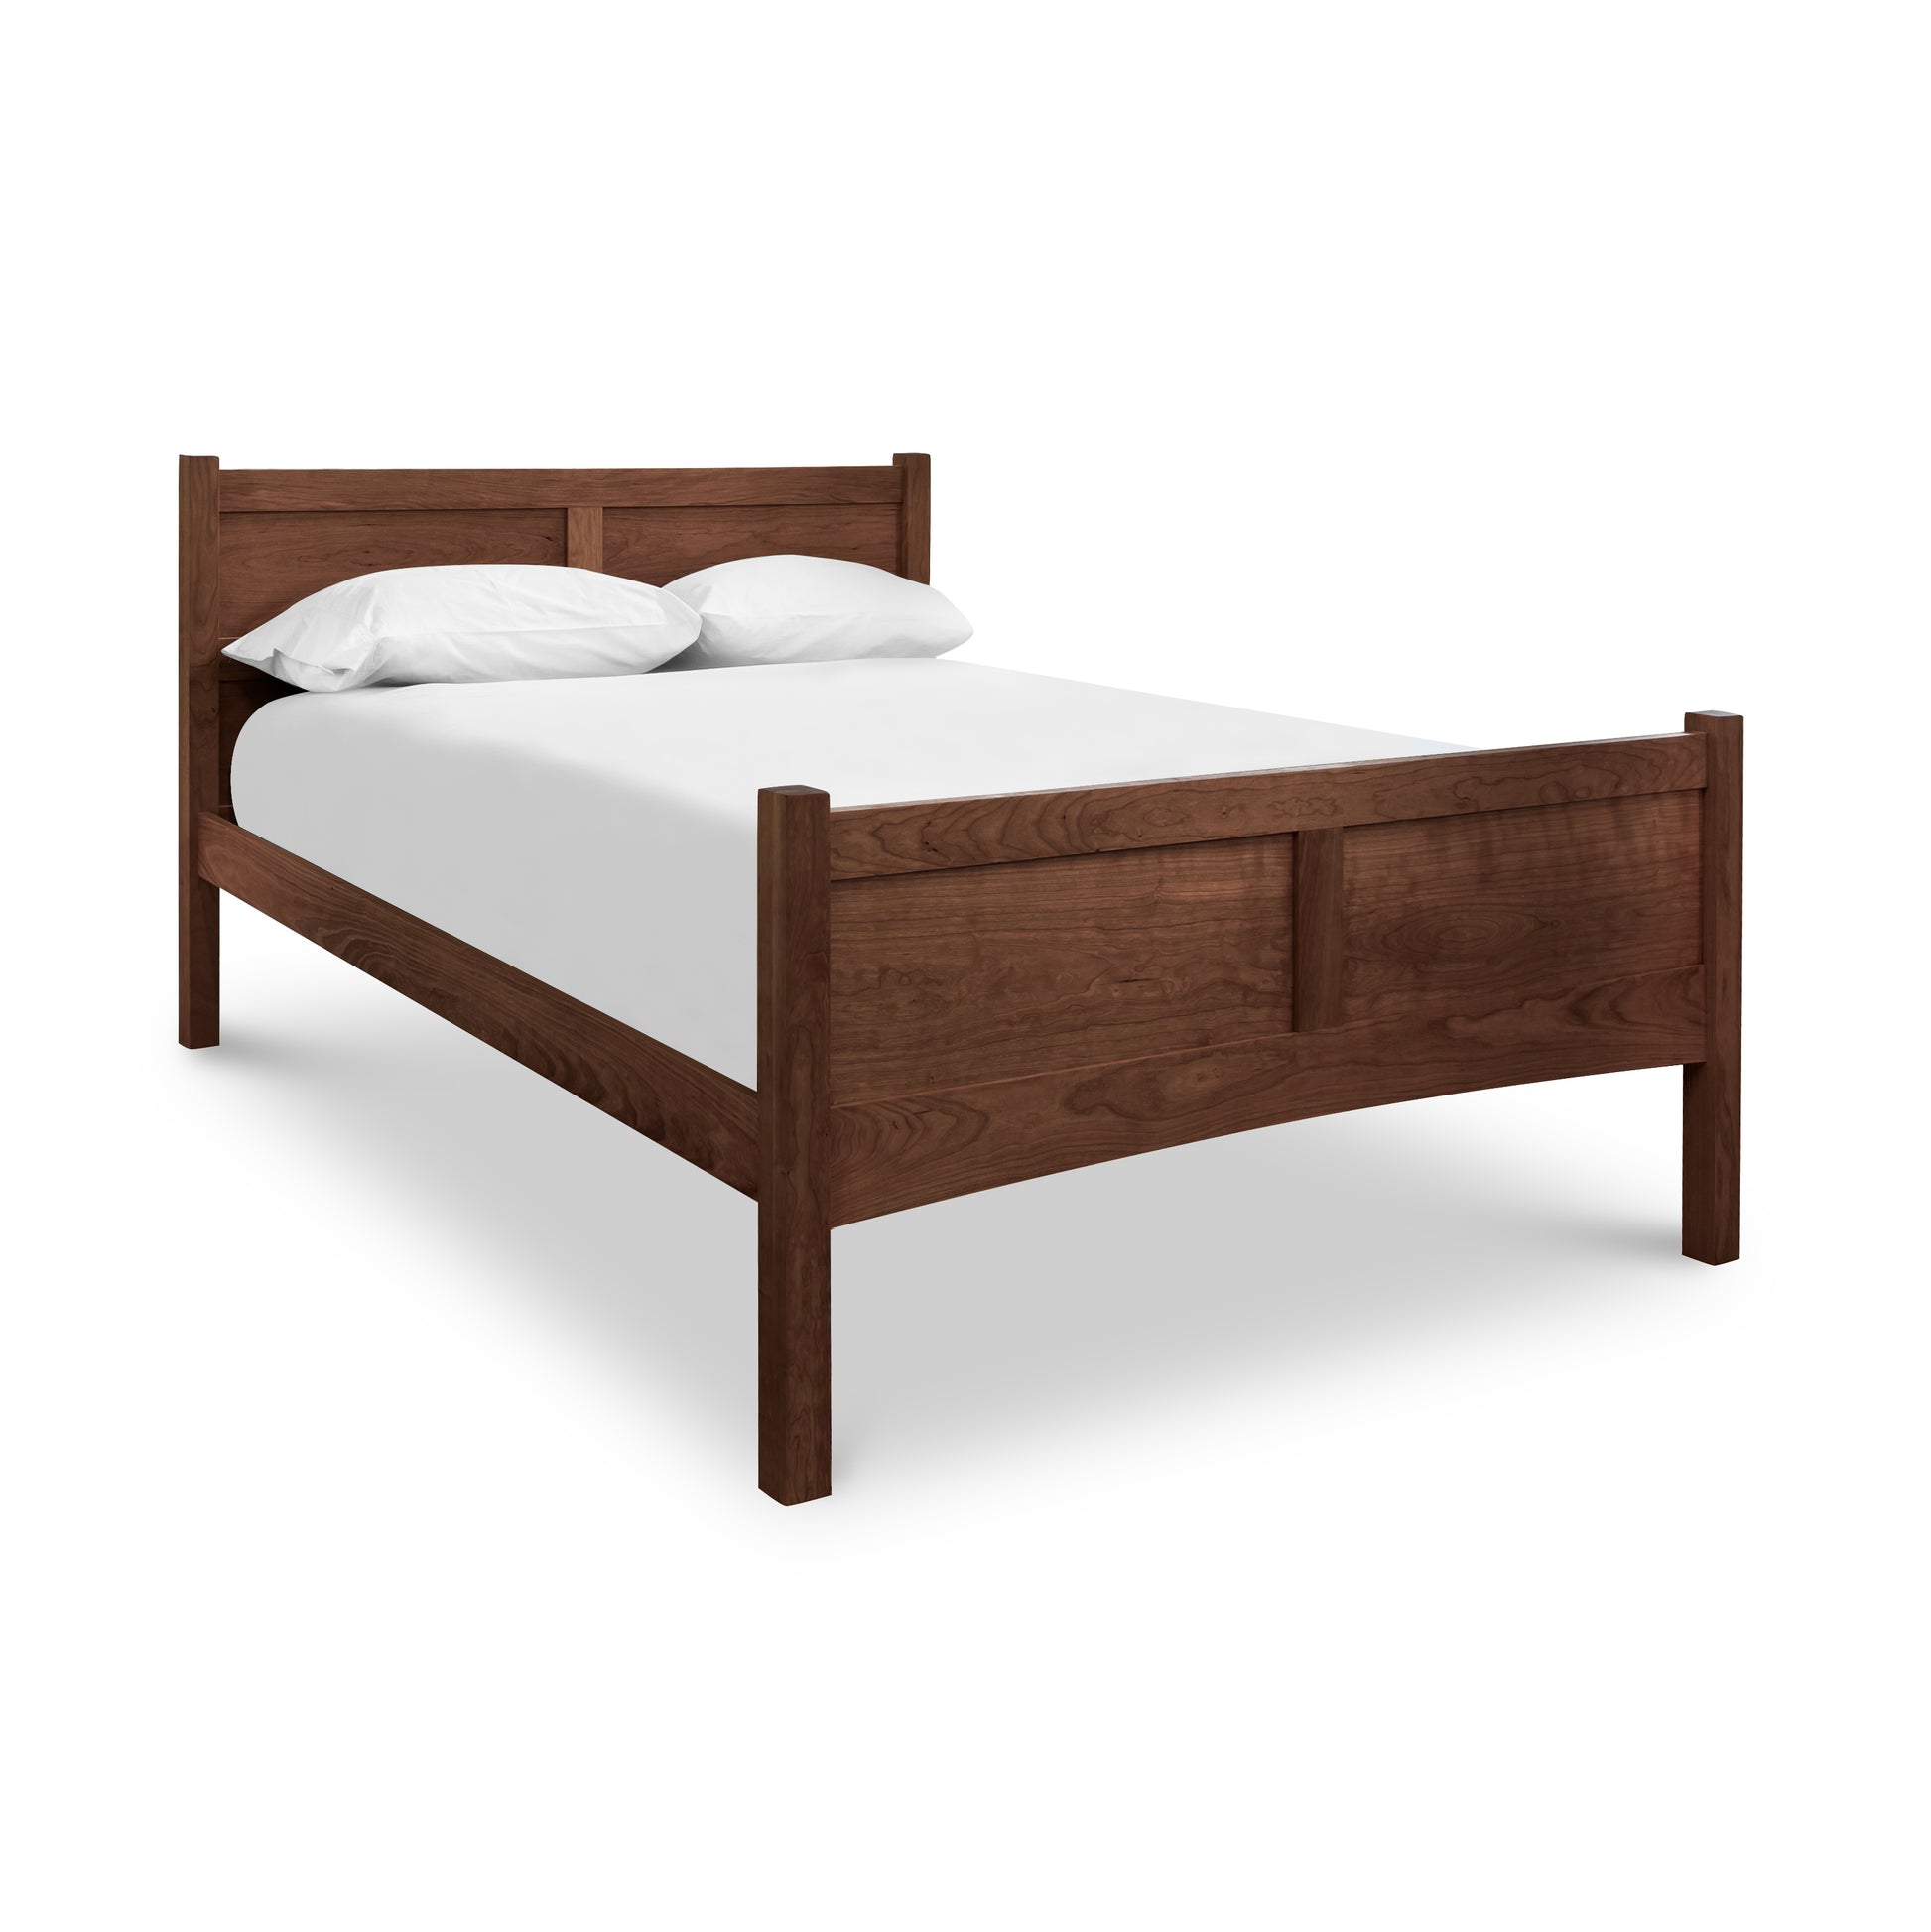 Essex High Footboard Bed from the Vermont Furniture Designs Collection with white bedding on a plain background.